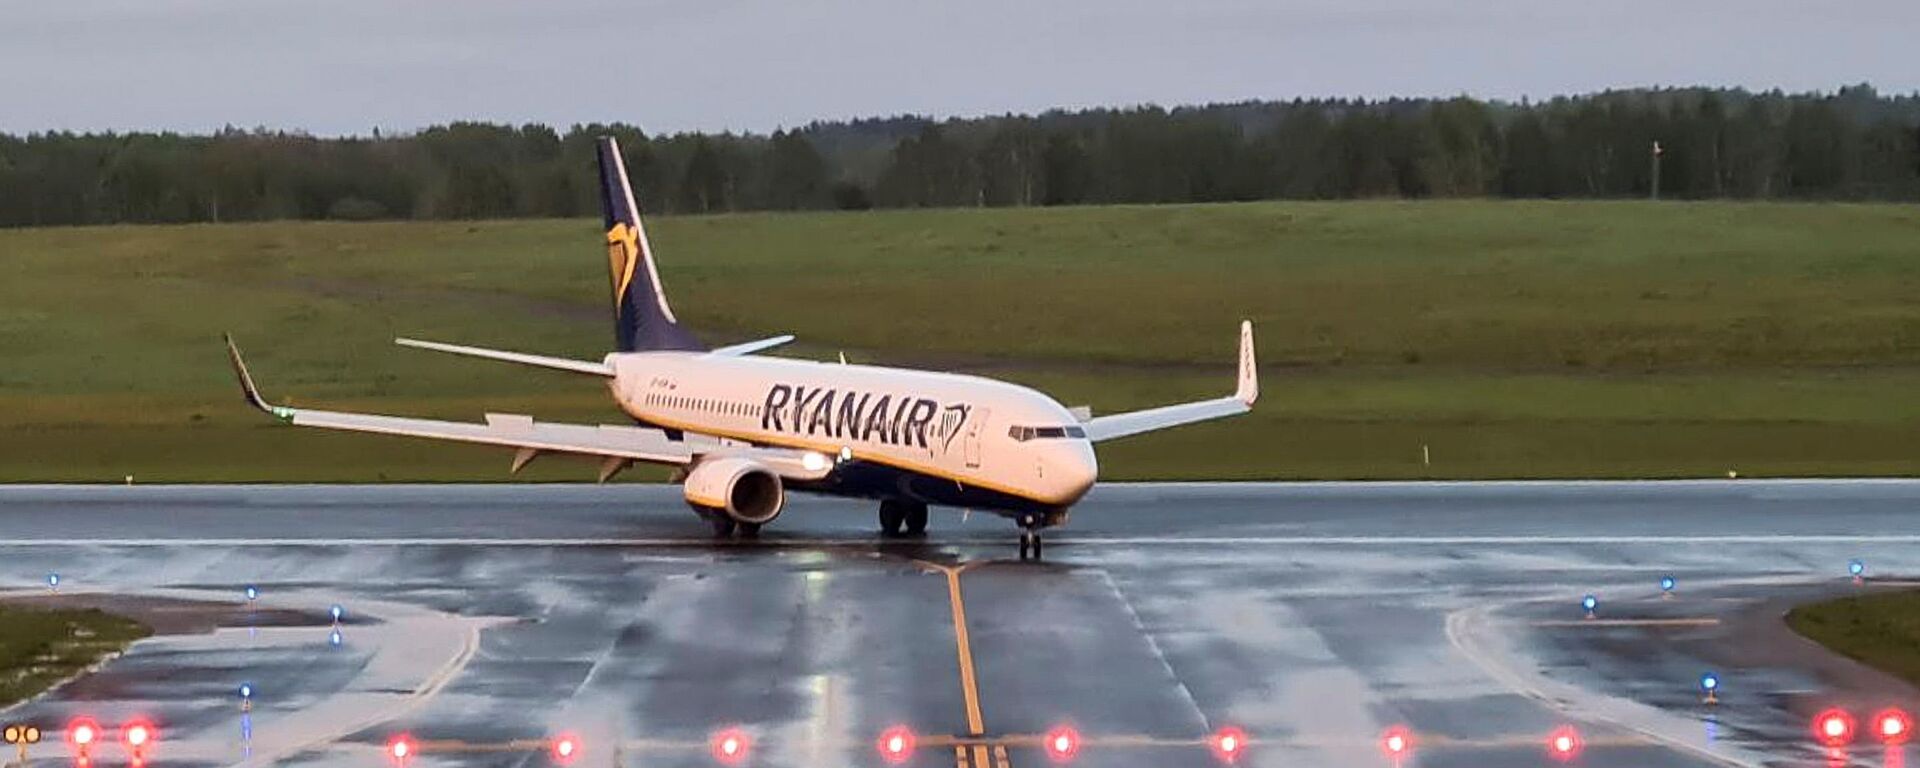 A Ryanair aircraft, which was carrying Belarusian opposition blogger and activist Roman Protasevich and was diverted to Belarus, lands at Vilnius Airport in Vilnius, Lithuania May 23, 2021. REUTERS/Andrius Sytas - Sputnik International, 1920, 24.05.2021